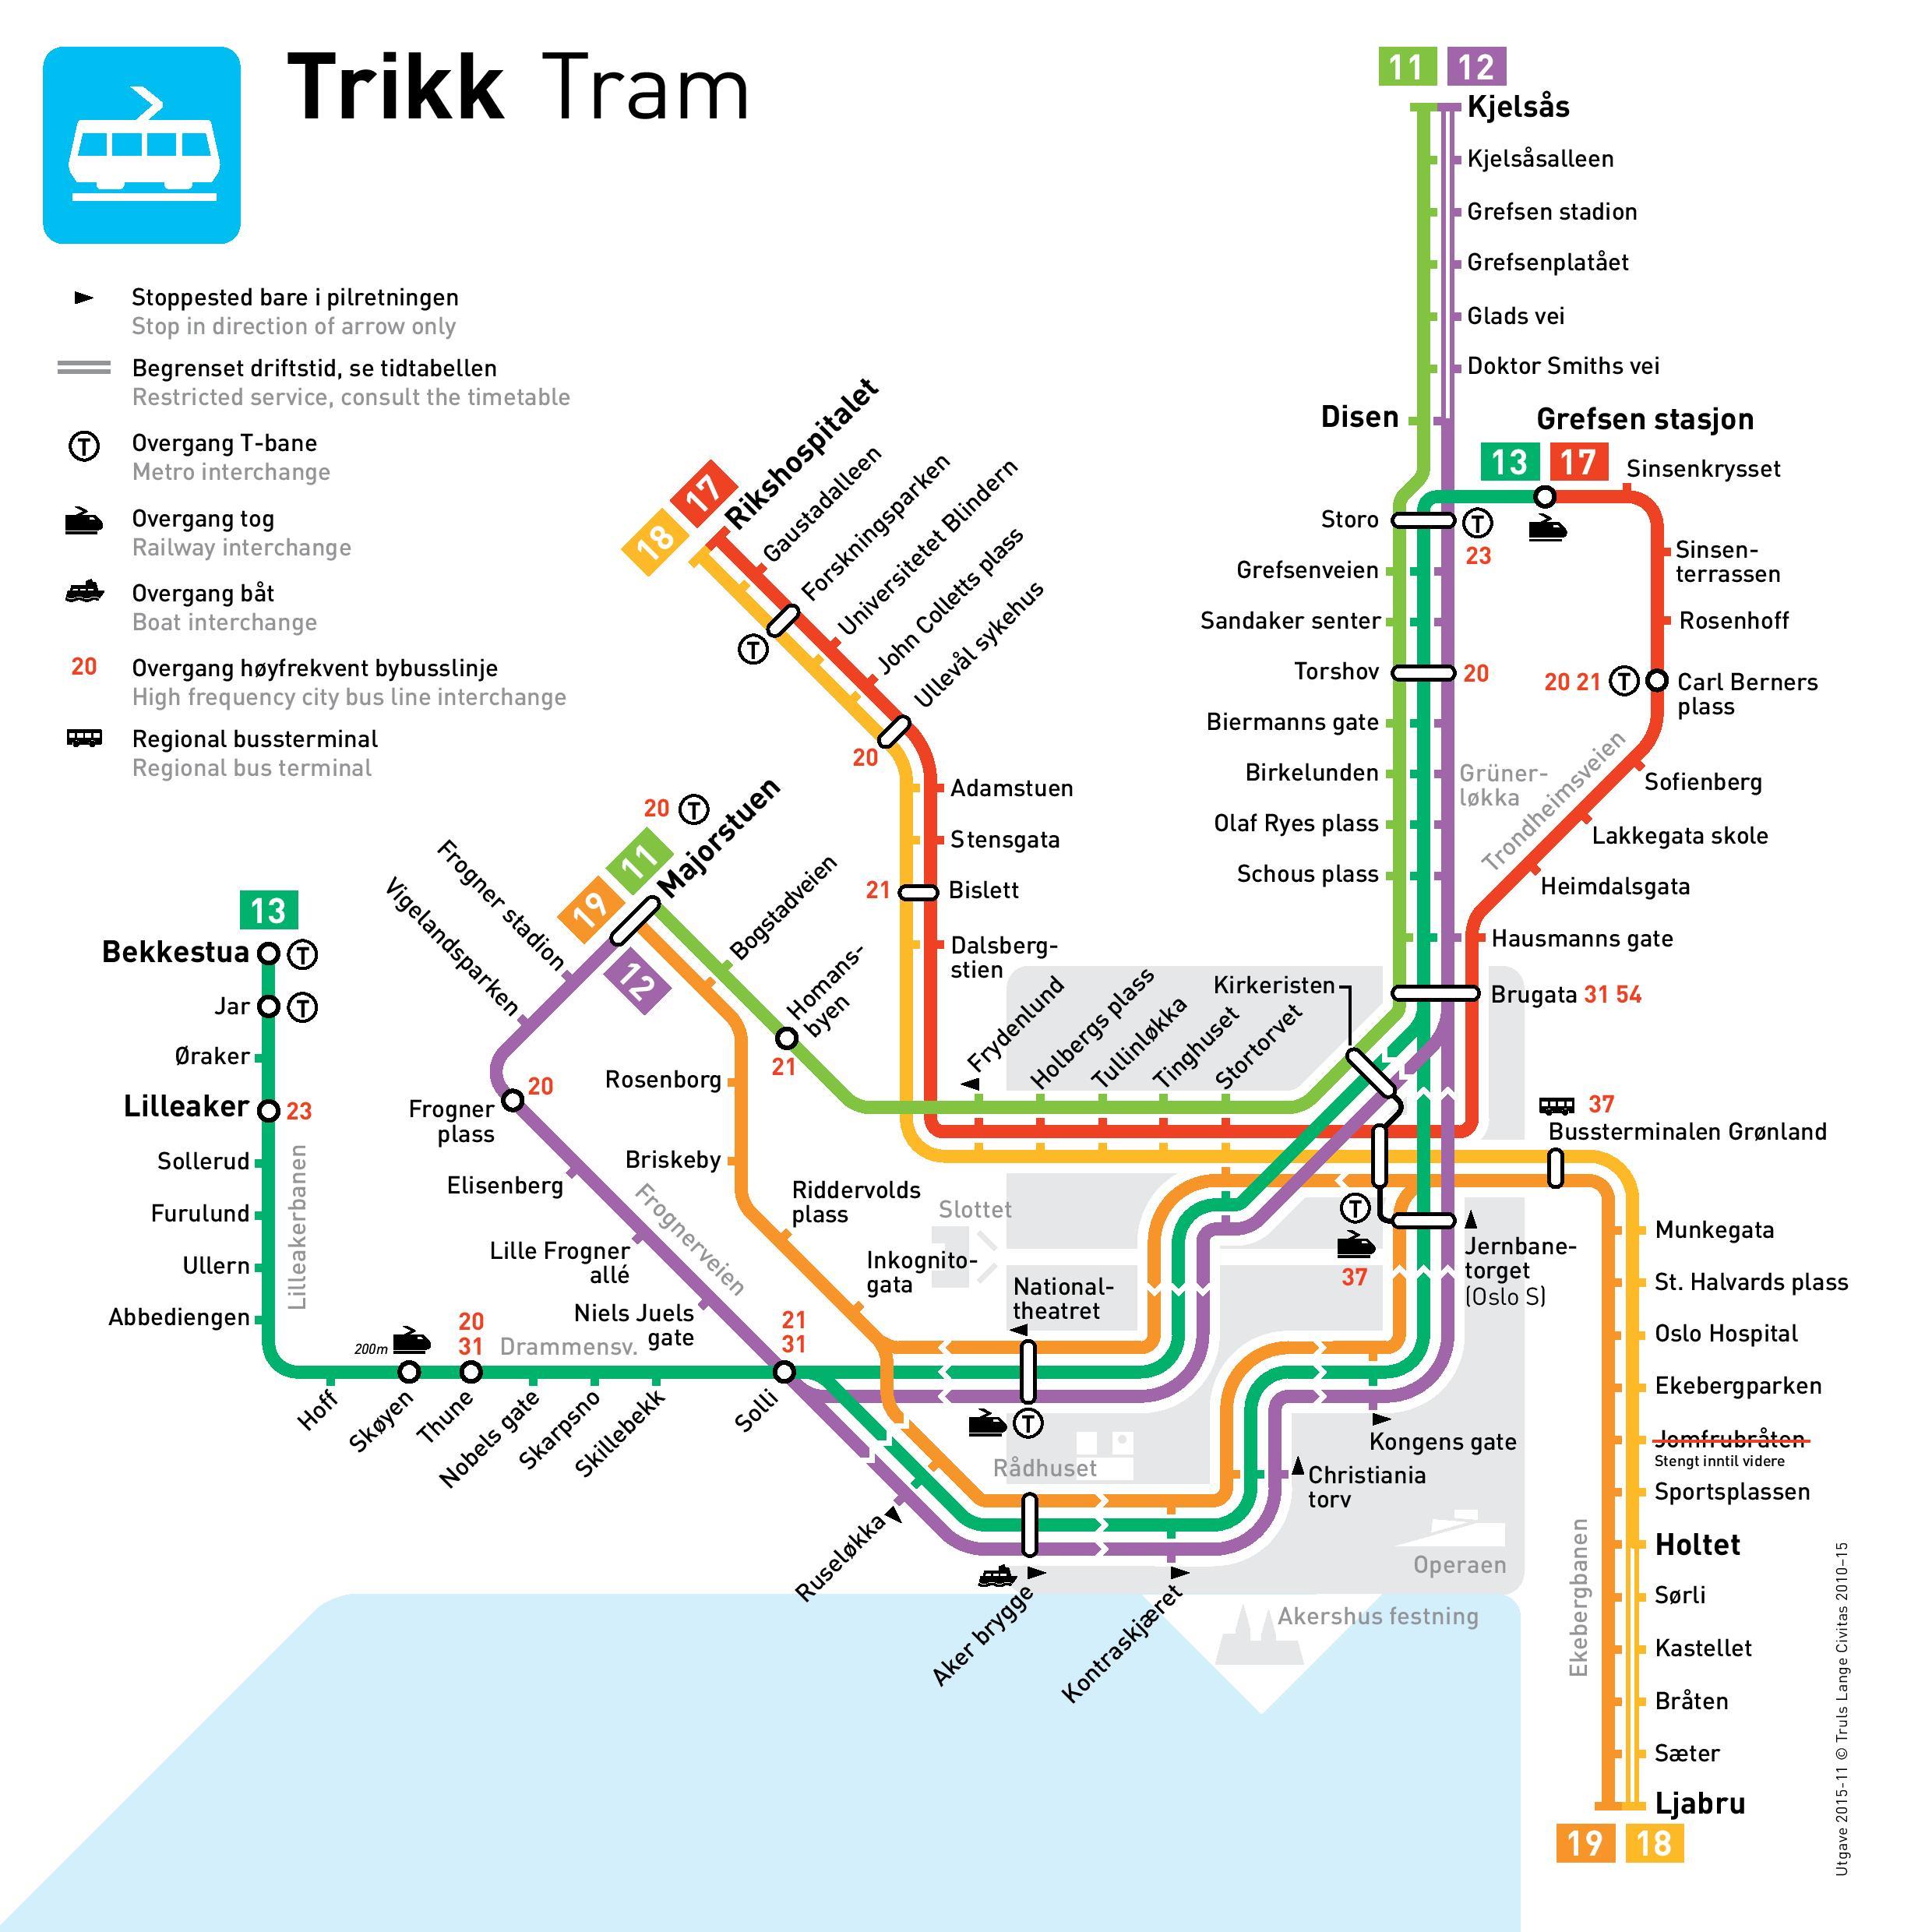 Map of Oslo tram: tram lines and tram stations of Oslo